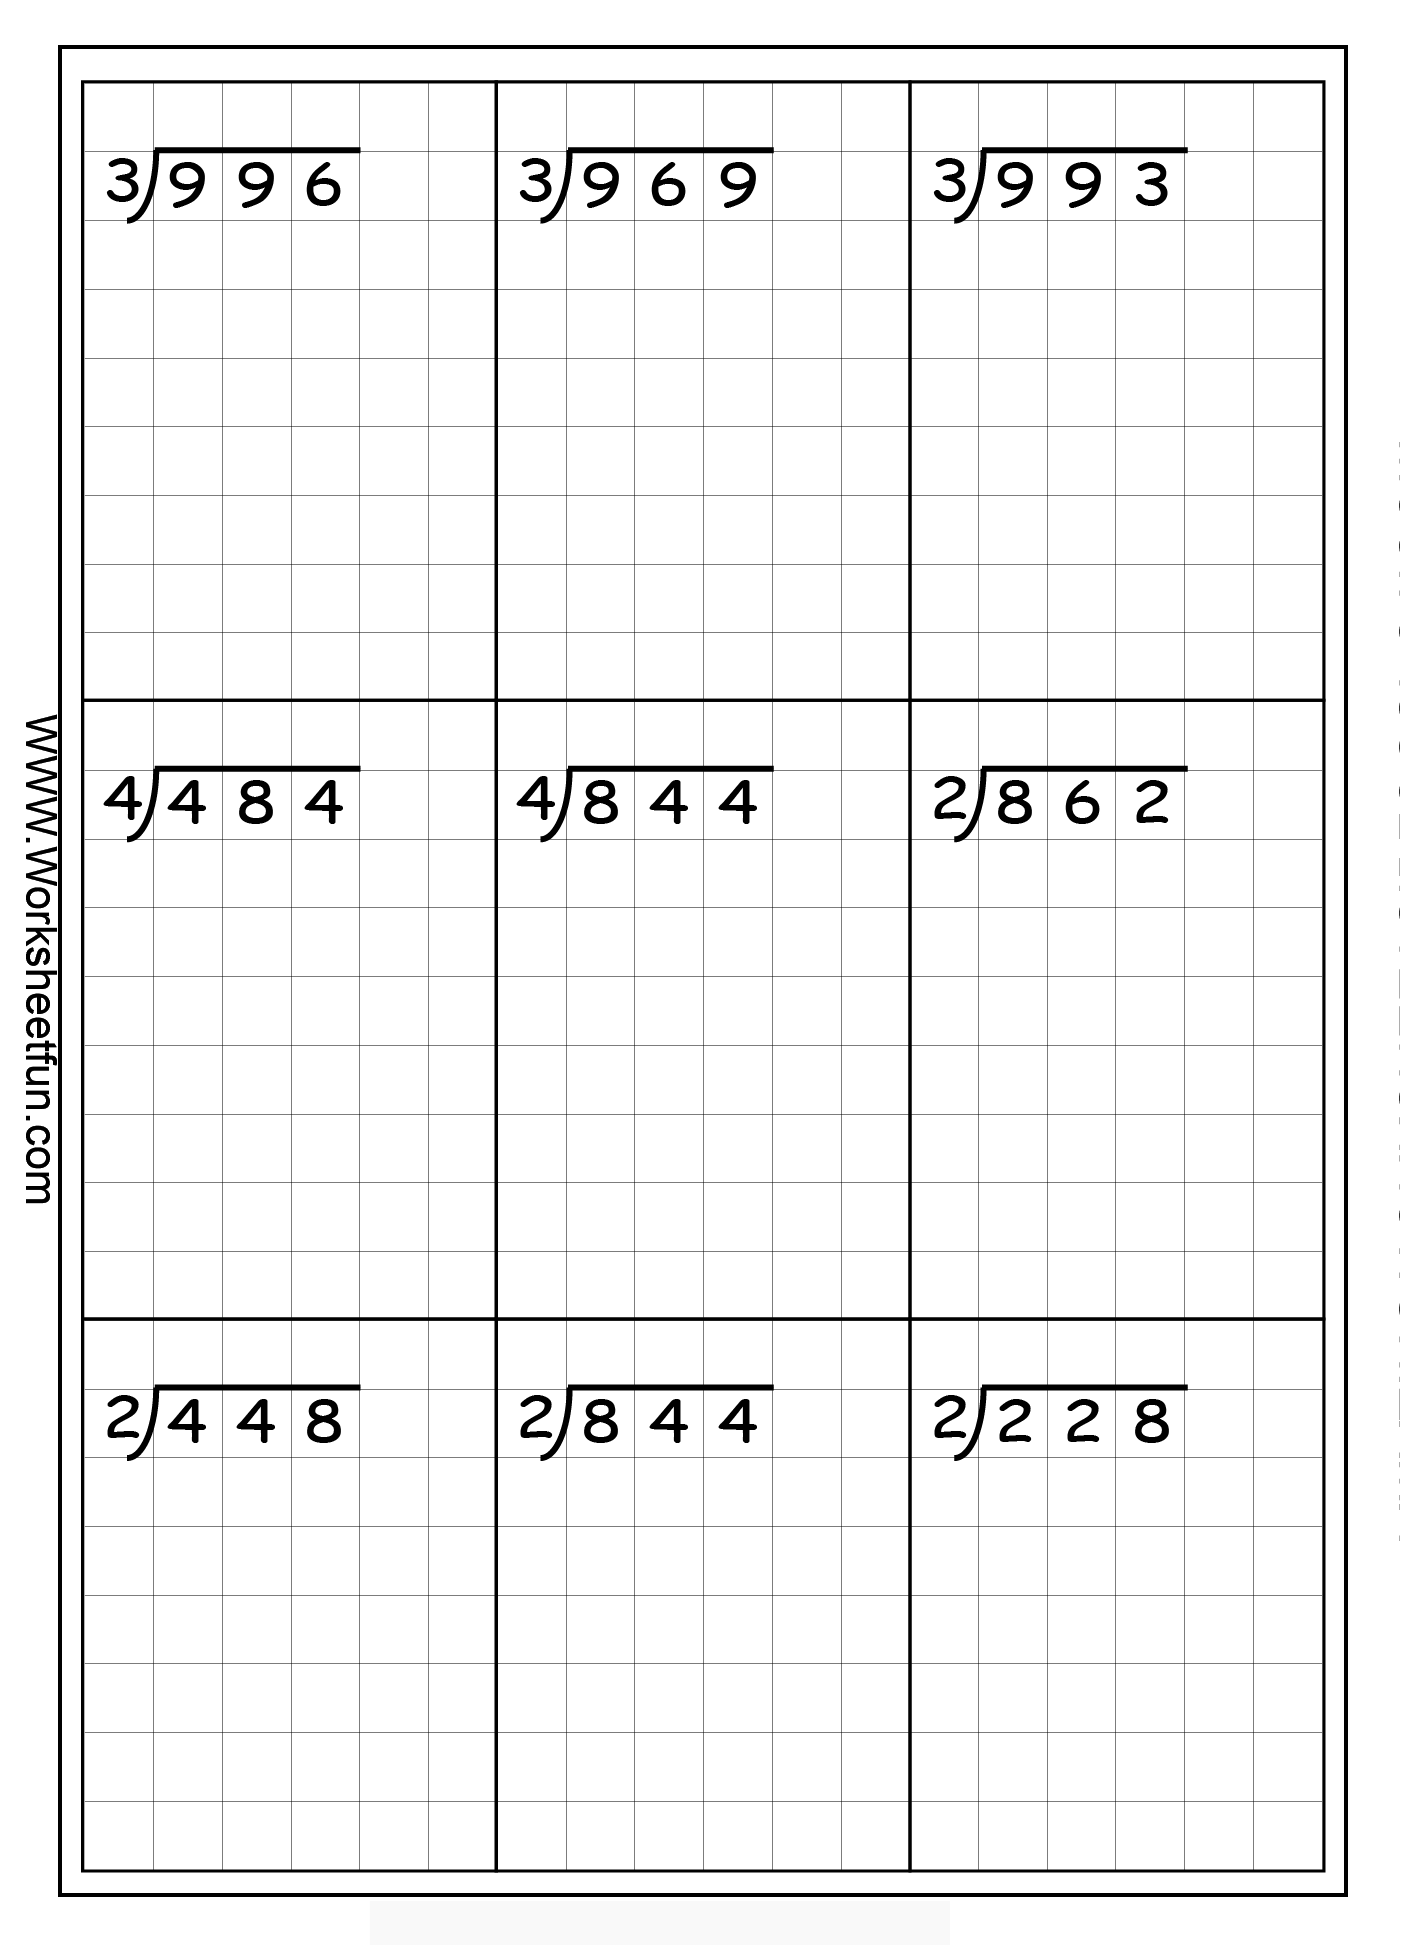 long-division-3-digits-by-1-digit-without-remainders-20